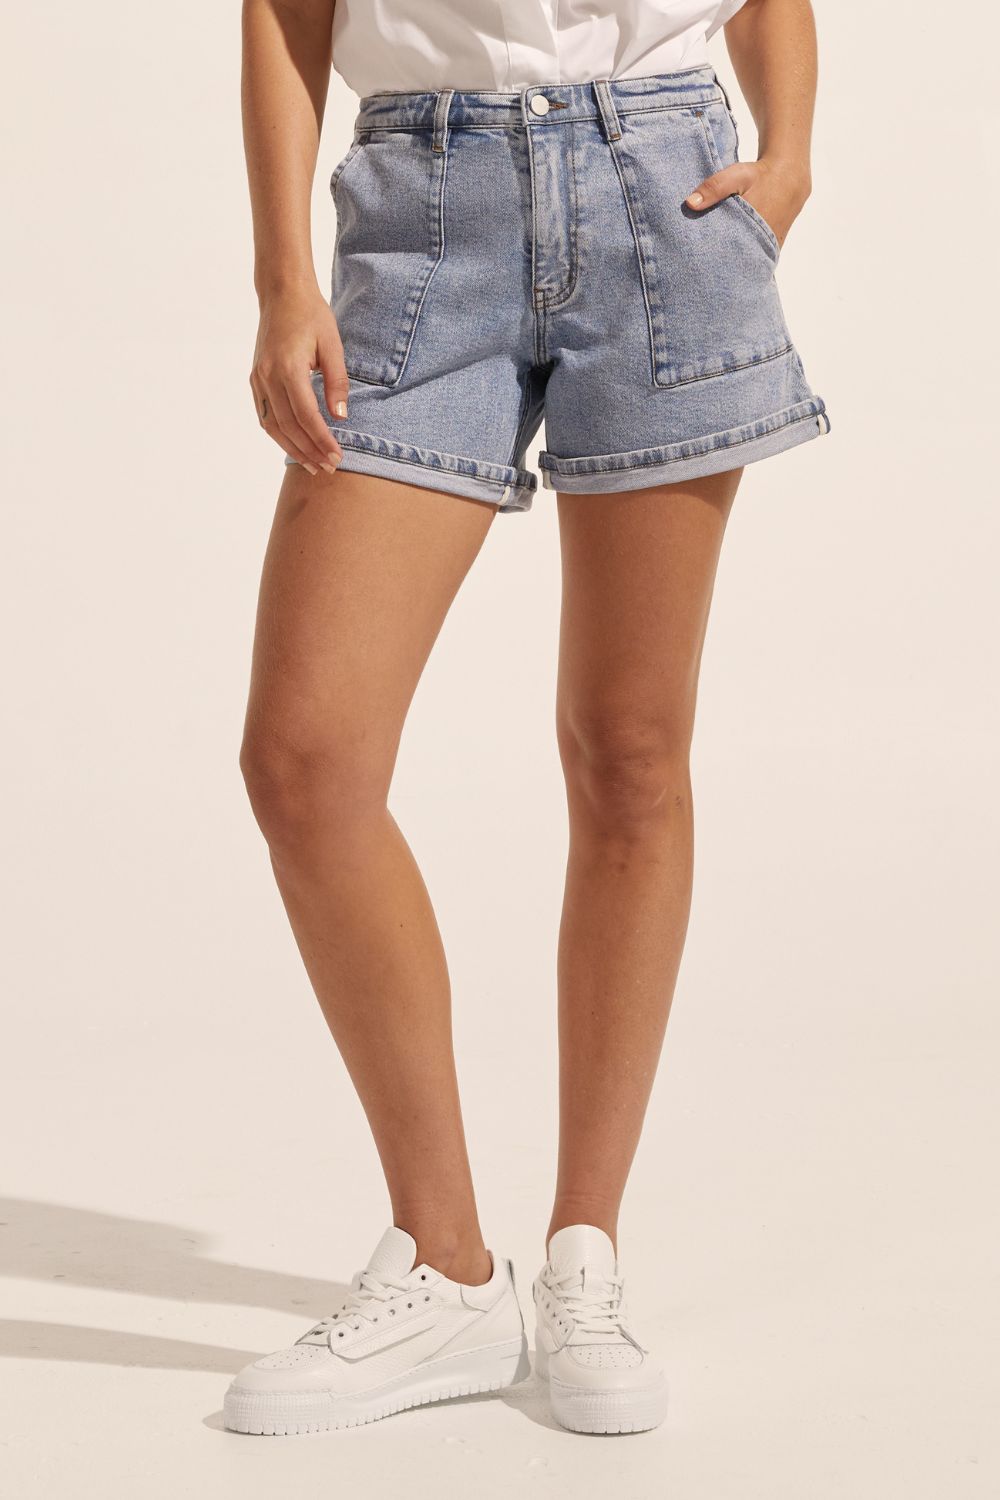 blue denim, shorts, cuffed leg, top stitched pockets, mid rise, front image